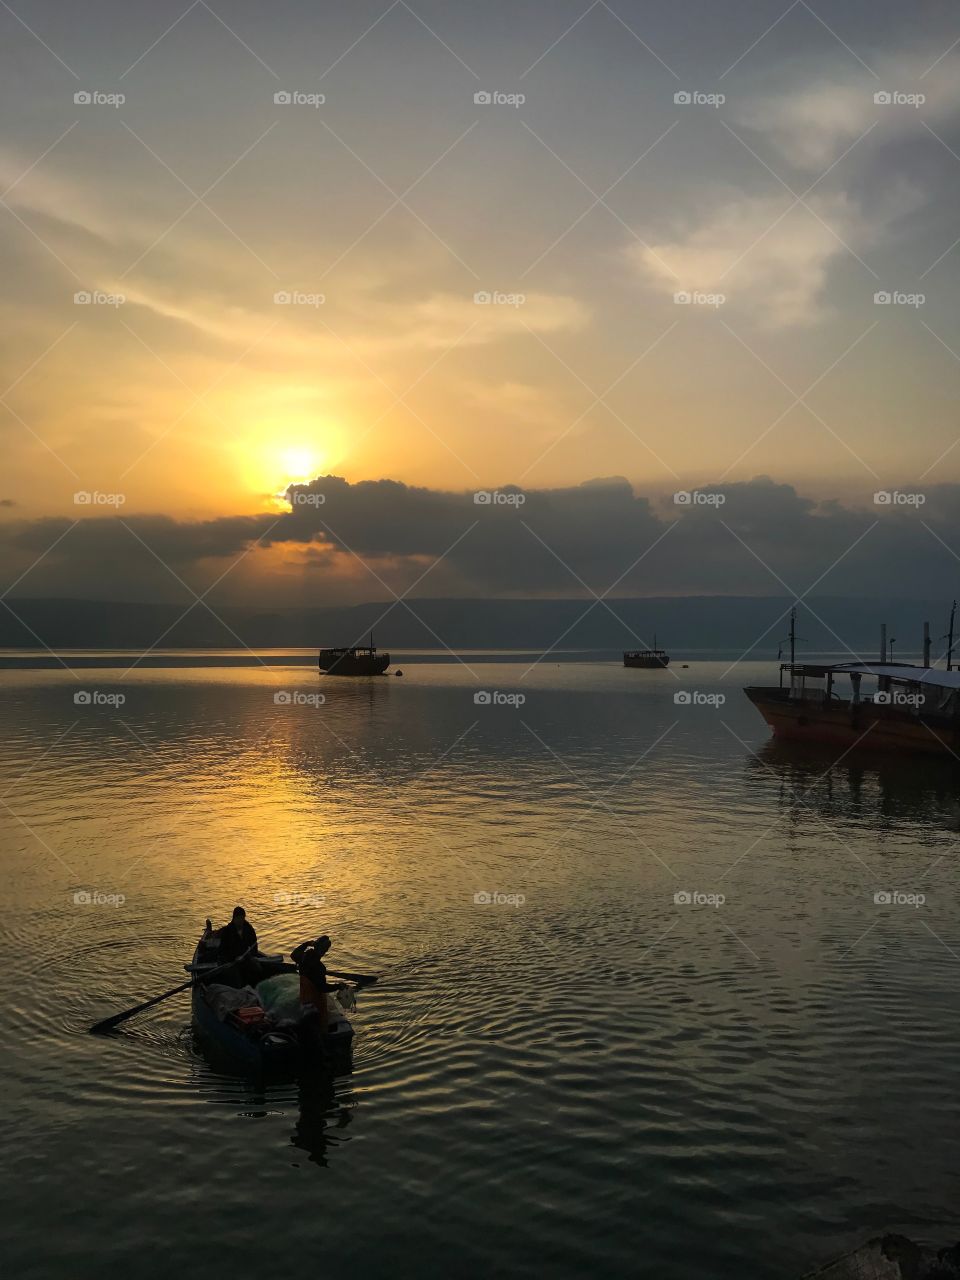 Nature/Travel - The Sea Of Galilee - Israel 